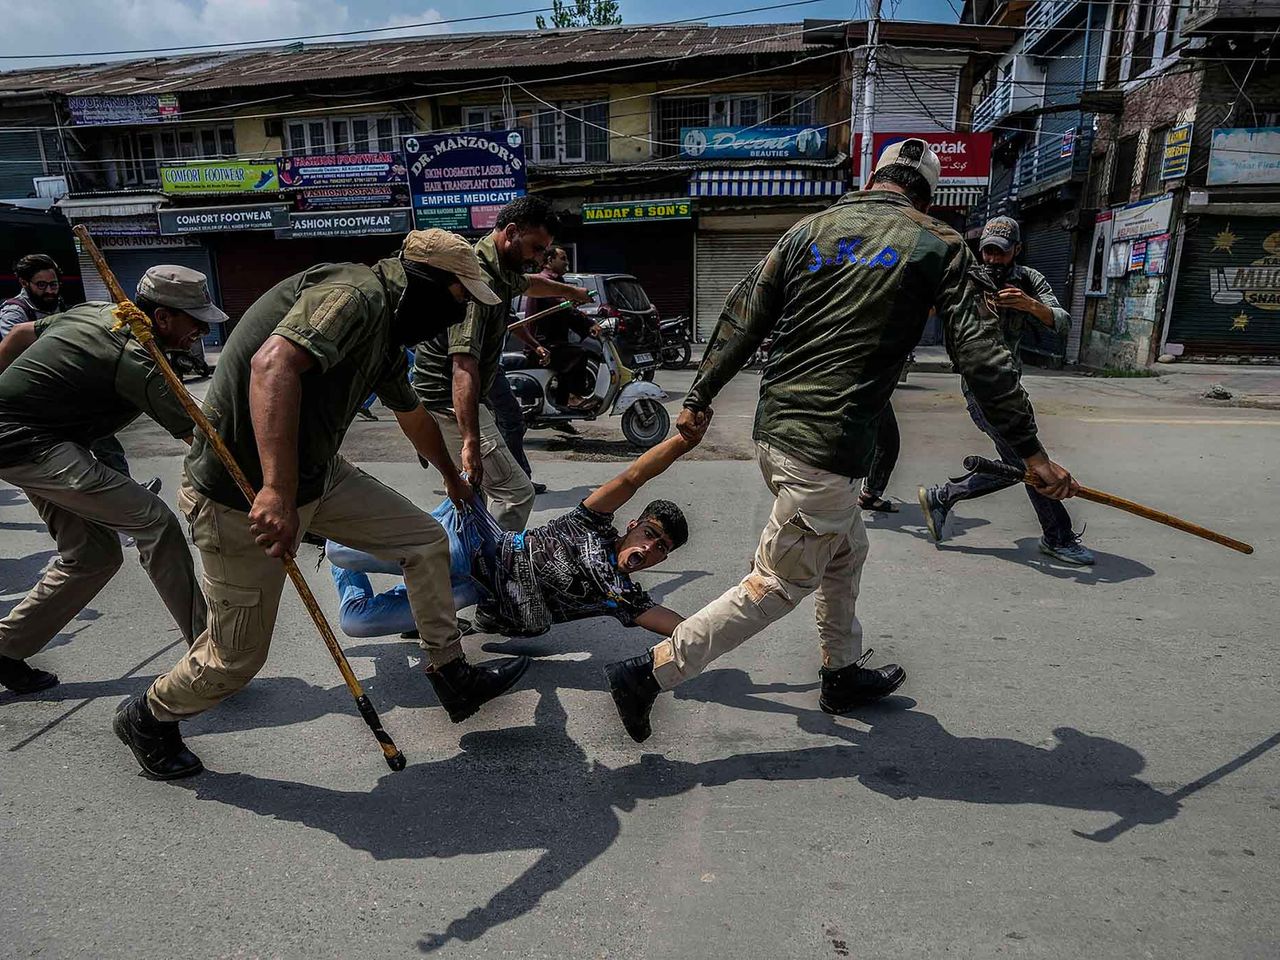 Indian policemen detain a Kashmiri Shiite Muslim for participating in a religious procession in Srinagar, Indian controlled Kashmir, Sunday, Aug. 7, 2022. This project documents ongoing unrest in the long-disputed region of Kashmir, dating back to 1947, when India and Pakistan gained independence from Britain. Both nations claim Kashmir in its entirety, and each administers a portion of the region. In Indian-administered Kashmir, rebels have been fighting Indian rule for decades, seeking to unite the territory, either under Pakistani rule or as an independent country. India says that Pakistan supports armed insurgency in Kashmir. Pakistan denies the charge, saying it provides moral and diplomatic support only.